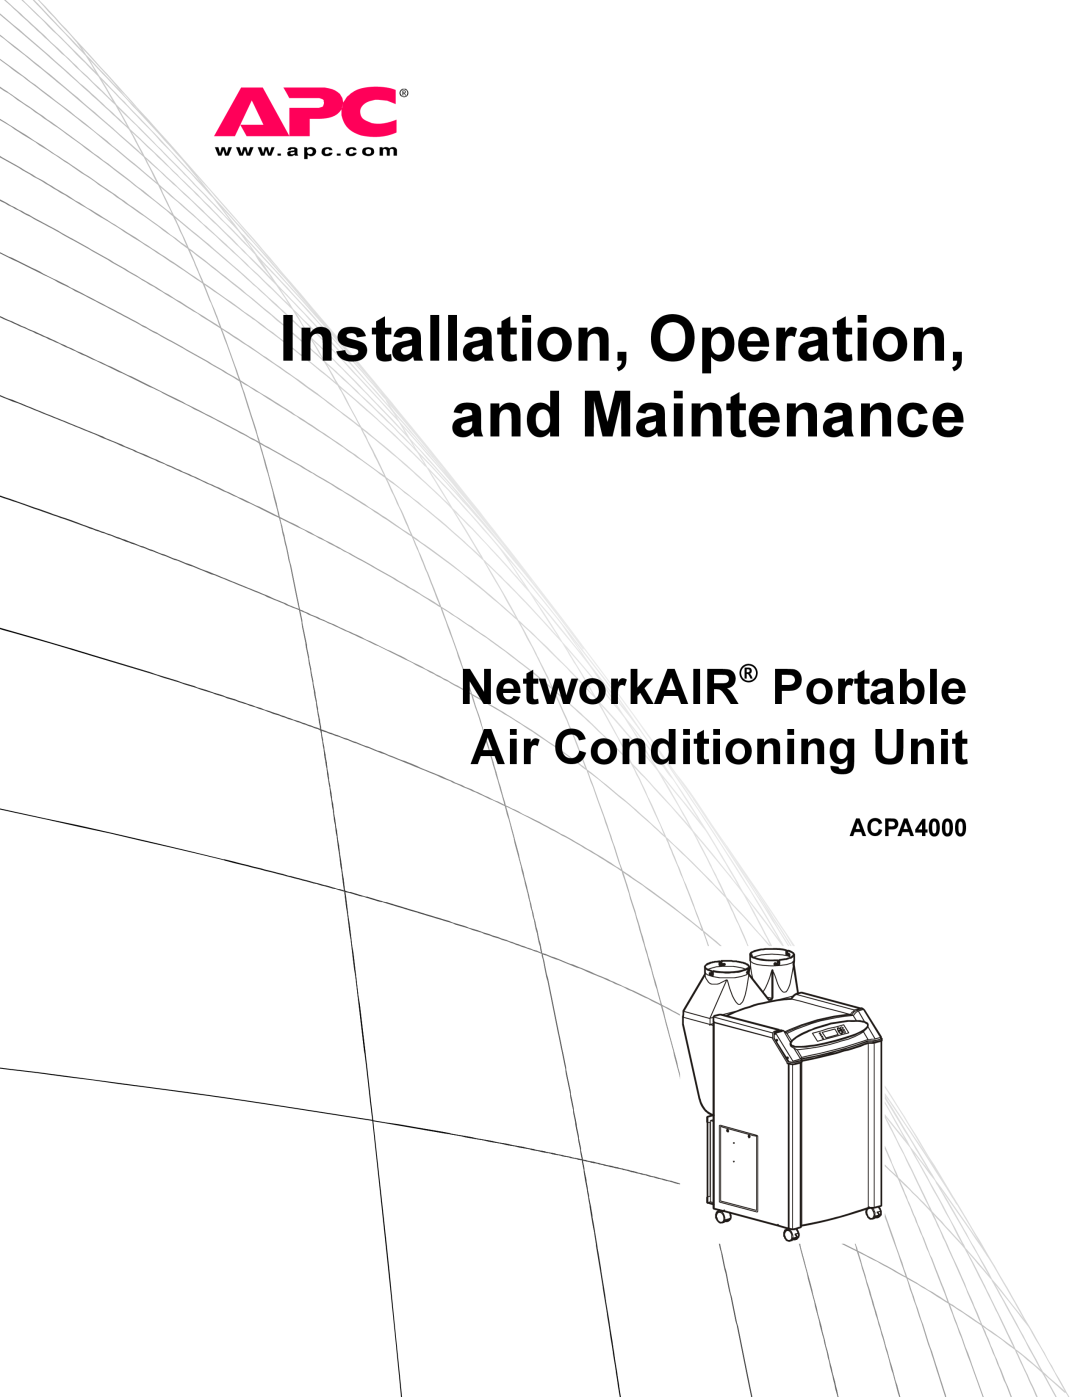 APC ACPA4000 manual Installation, Operation, and Maintenance, NetworkAIR Portable Air Conditioning Unit 